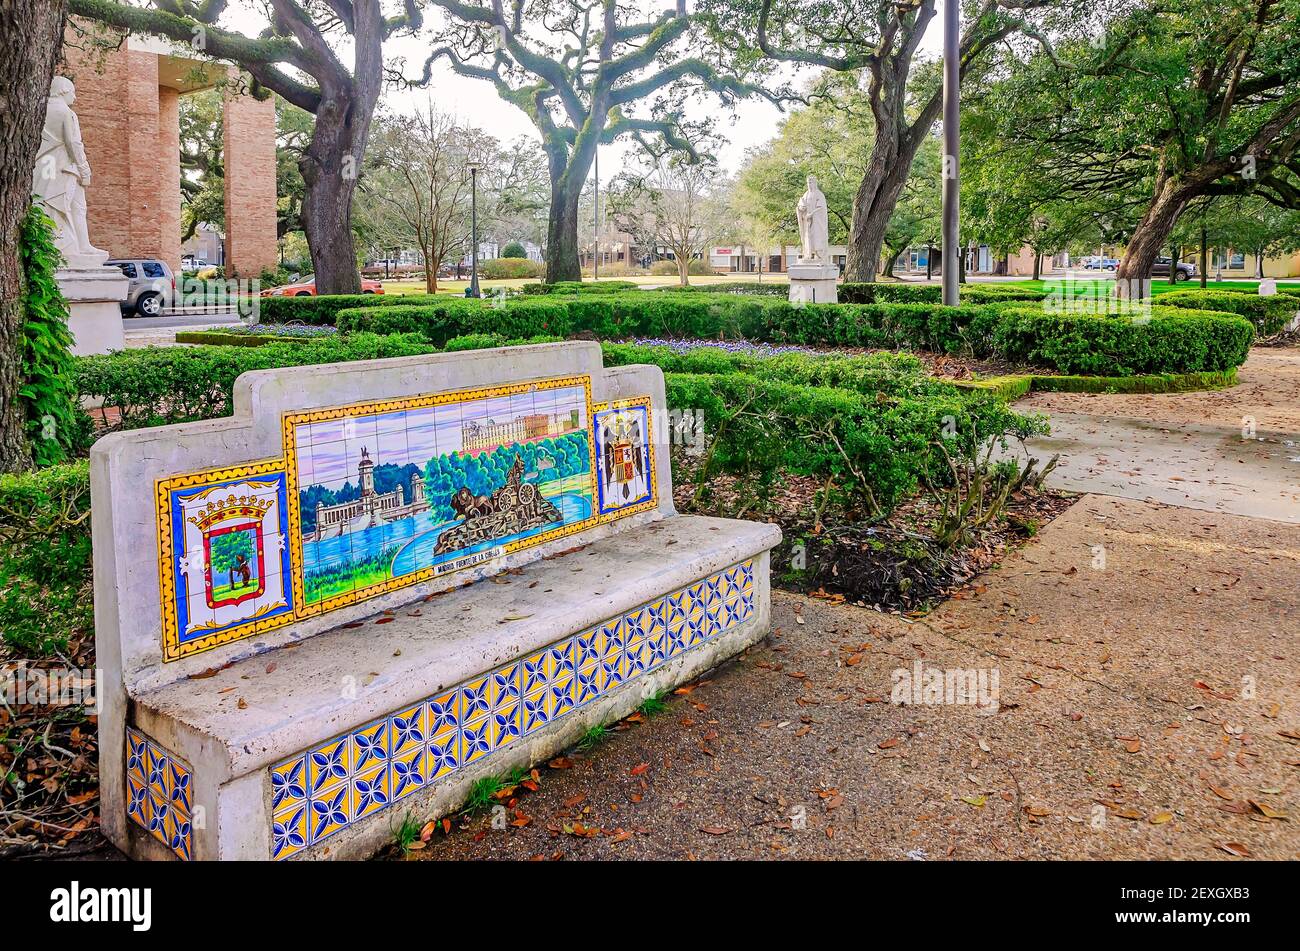 A tile mosaic bench stands in front of the fountain at Spanish Plaza, Feb. 27, 2021, in Mobile, Alabama. Mobile was ruled by Spain from 1780 to 1813. Stock Photo